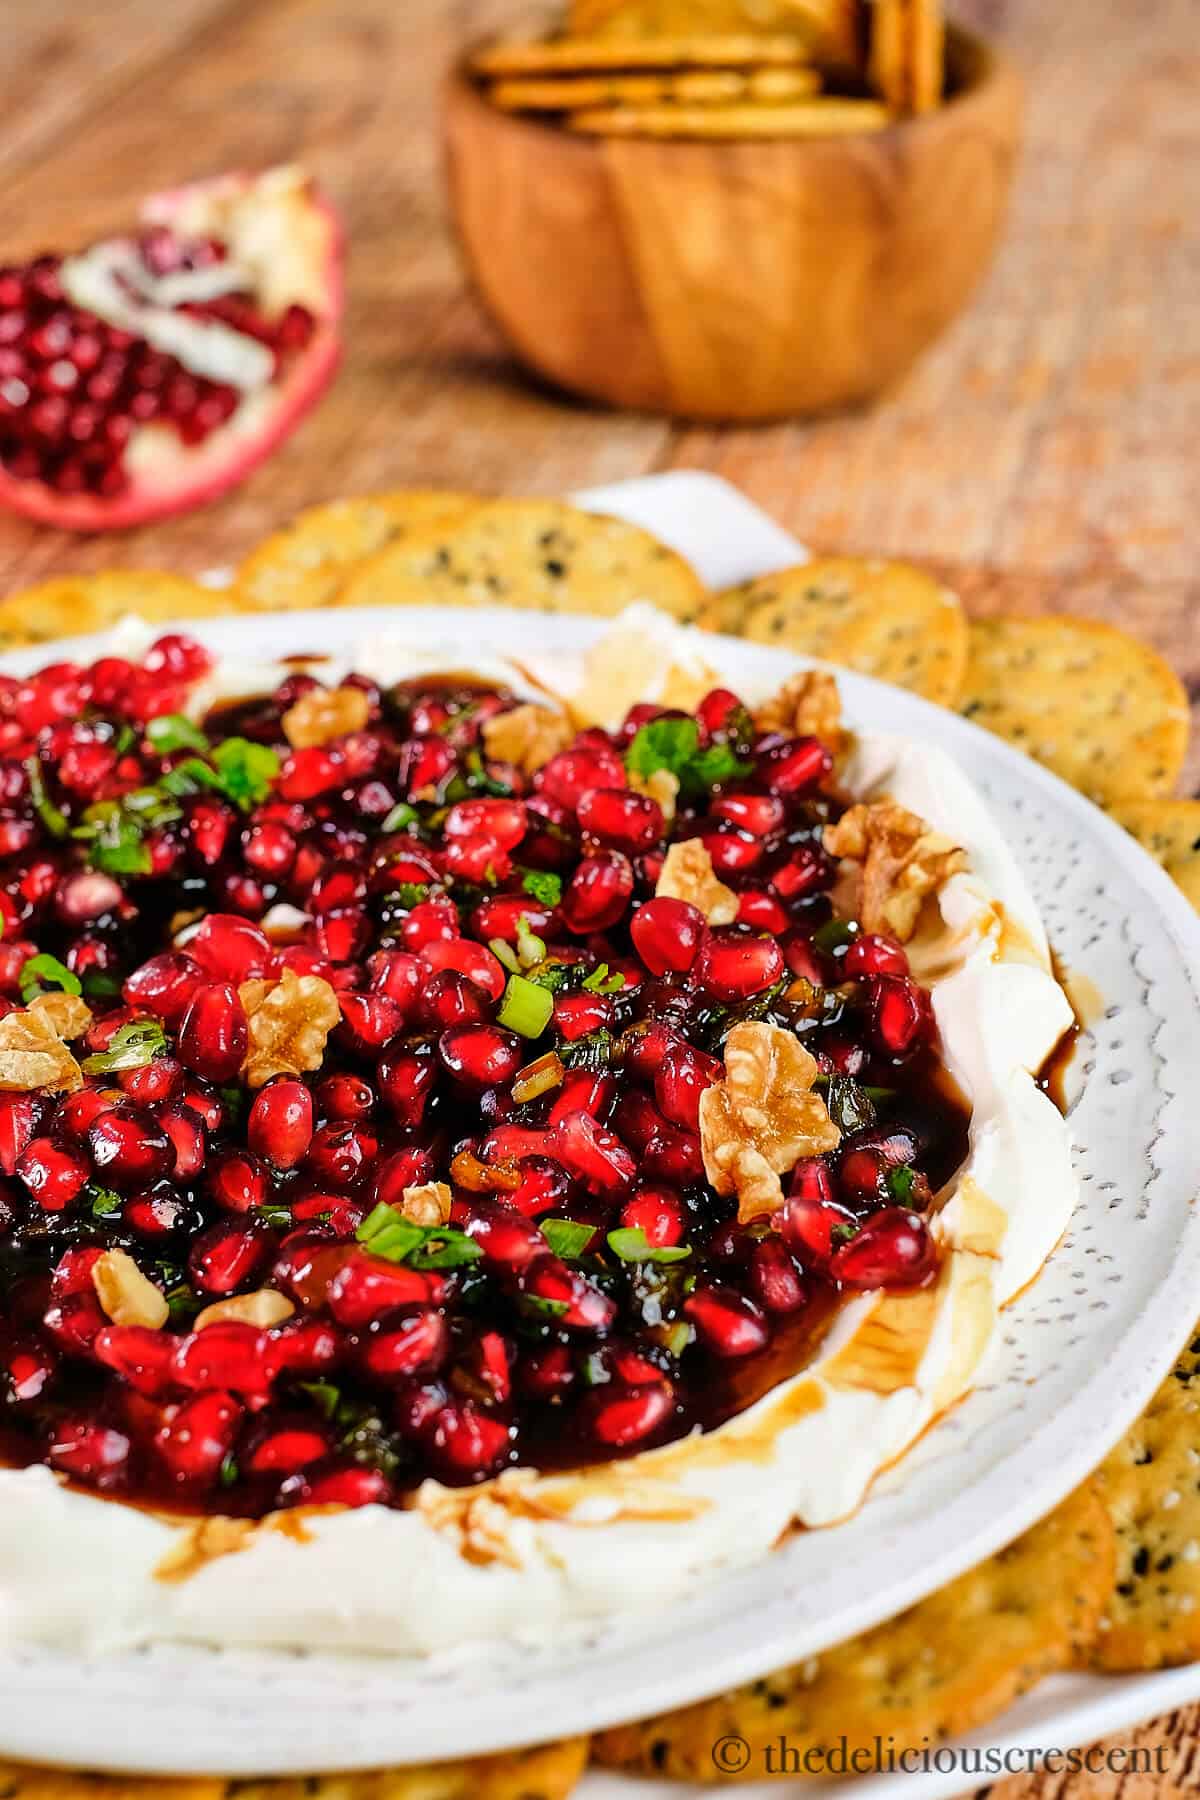 Pomegranate salsa served on cream cheese in a white plate.